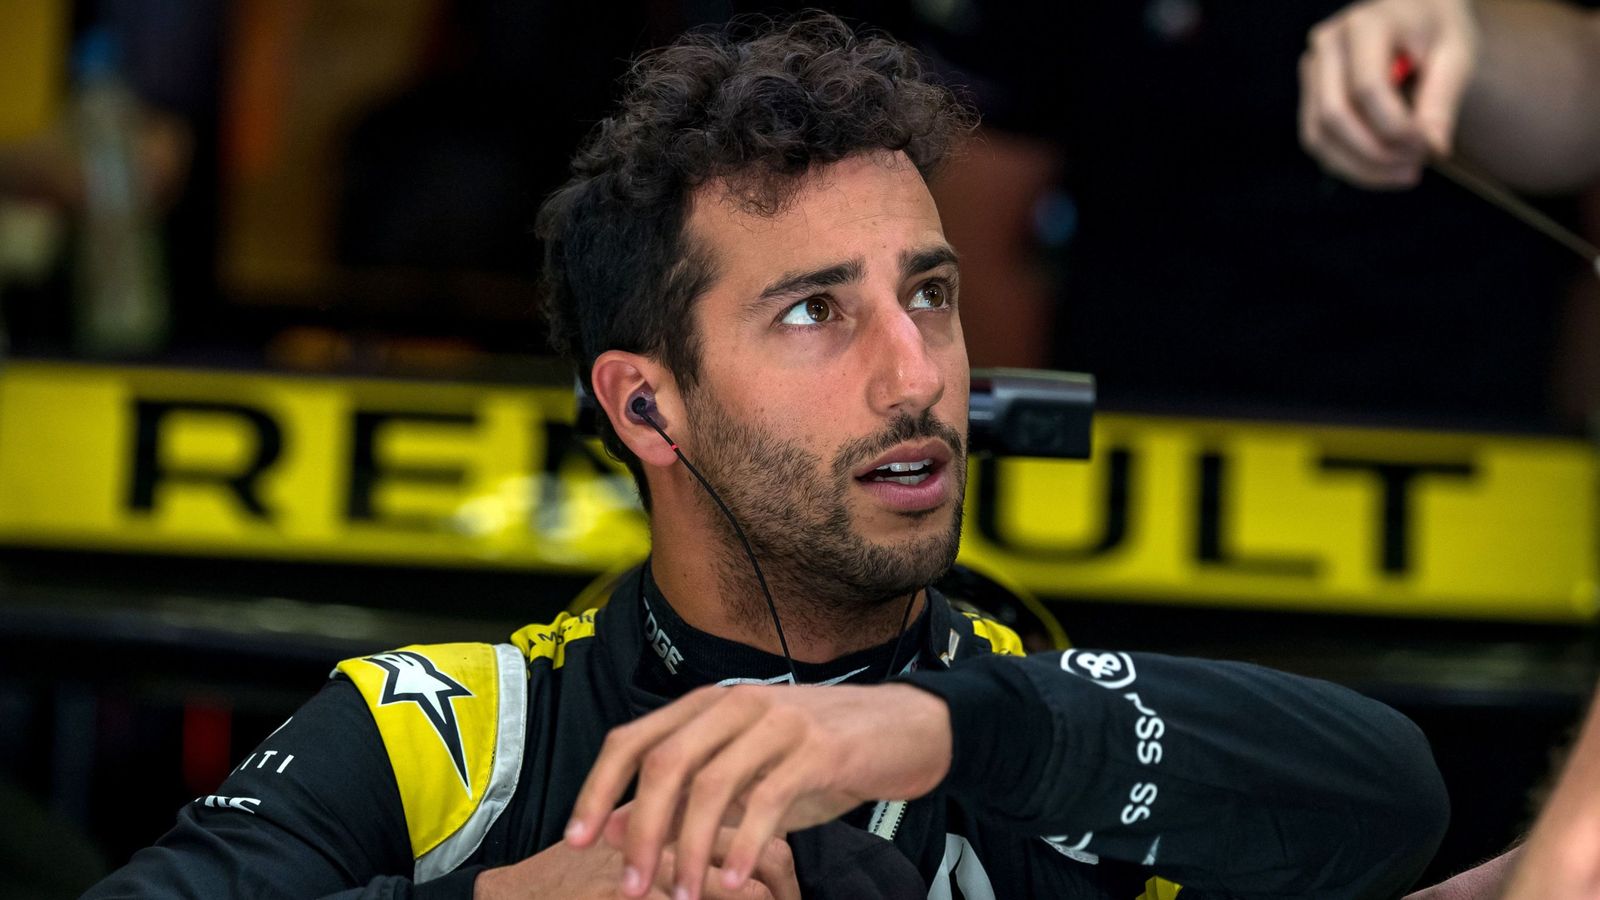 Daniel Ricciardo having to adapt at Renault, getting out of 'old habits ...